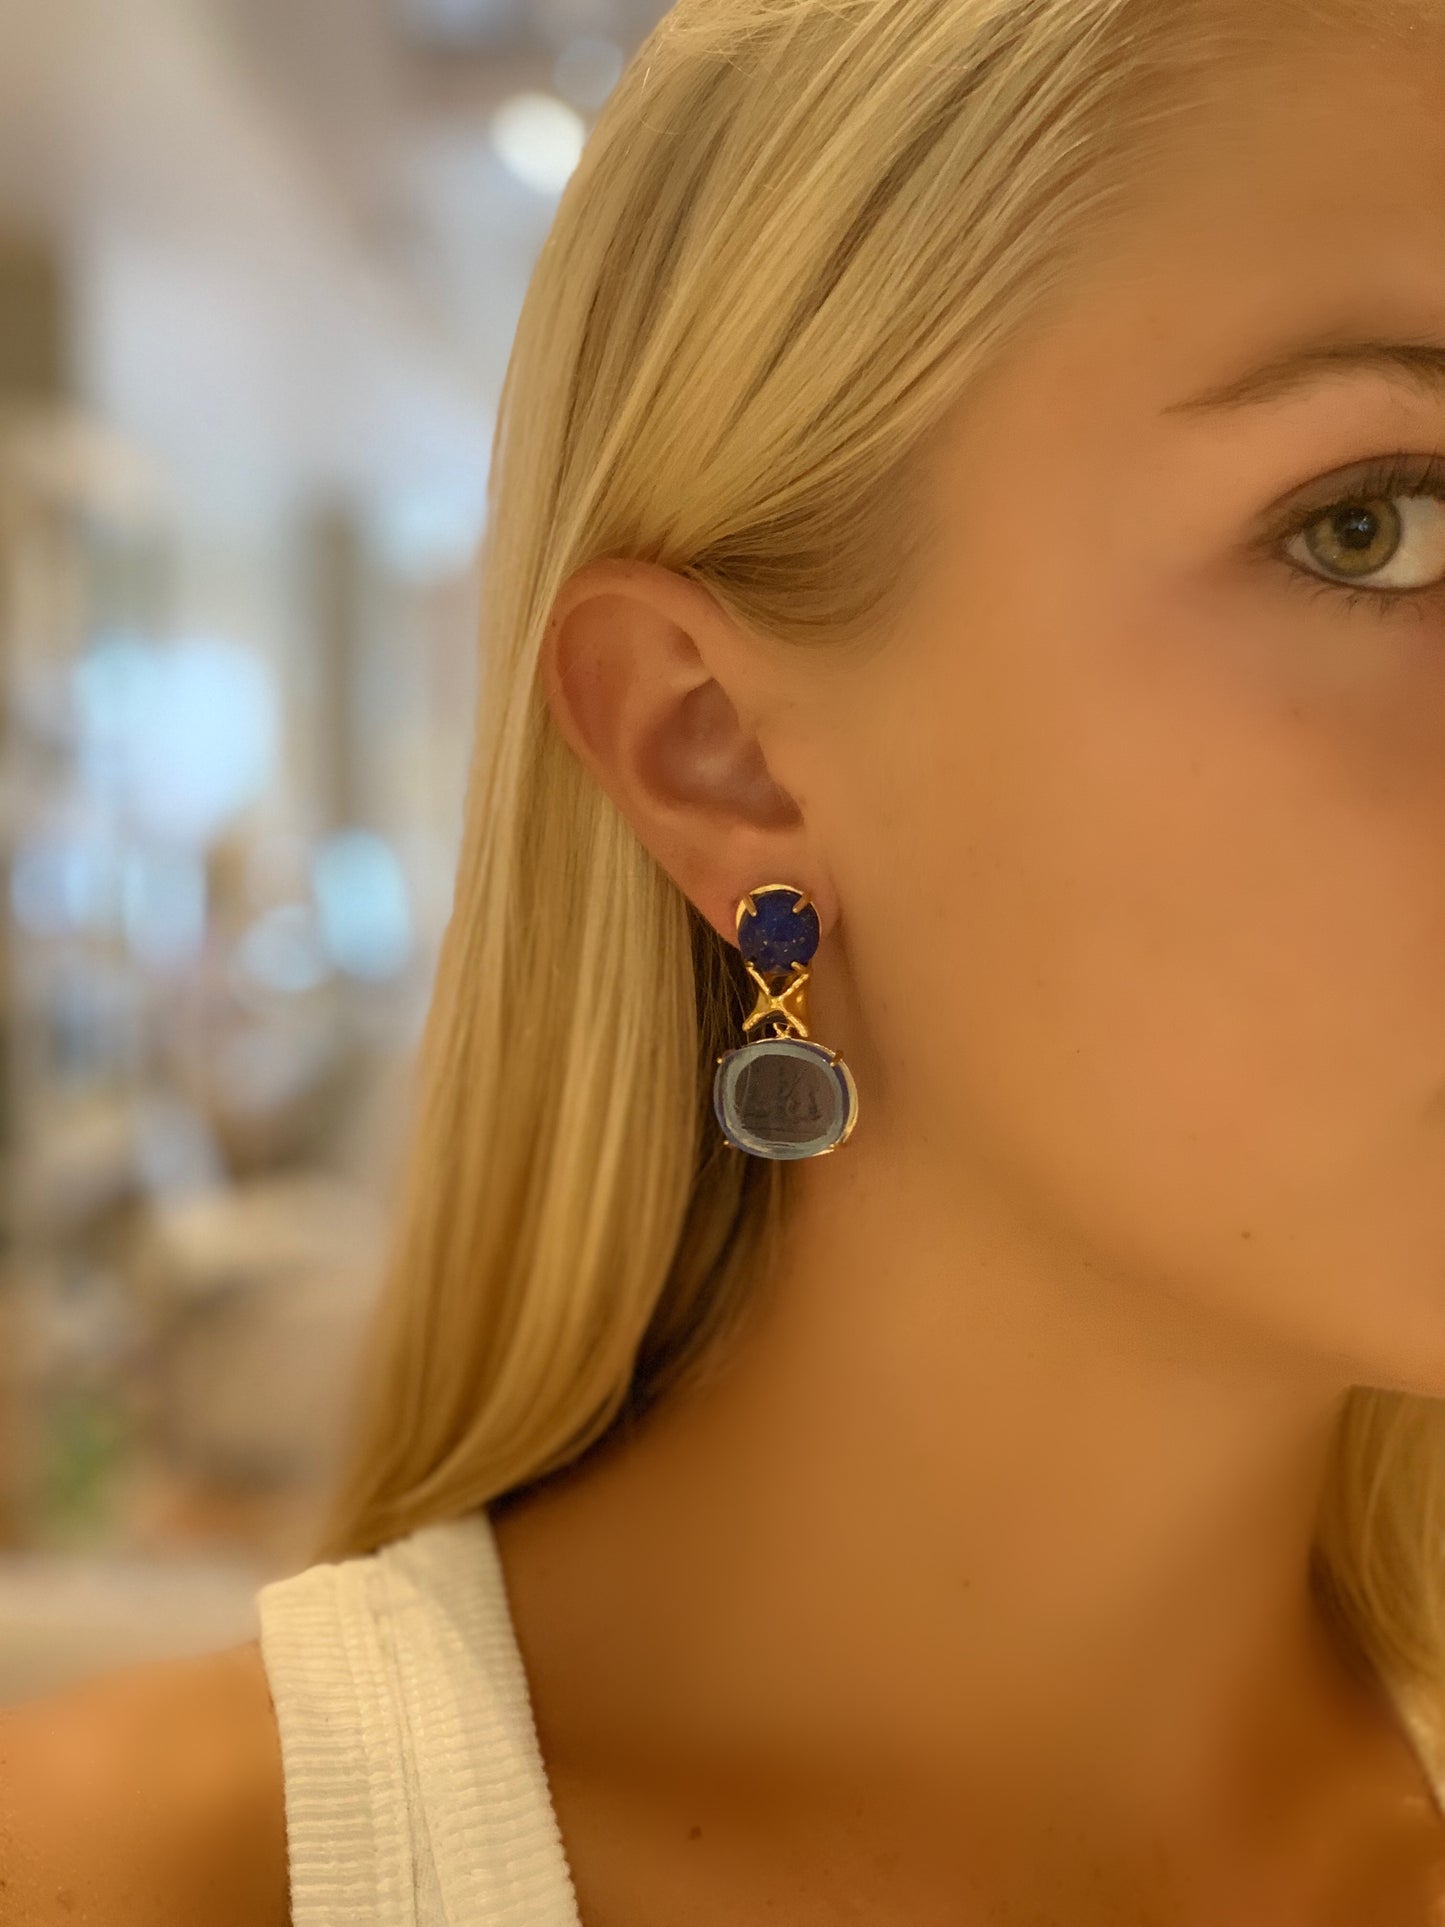 Faceted Lapis and Blue Triton Intaglio Earring